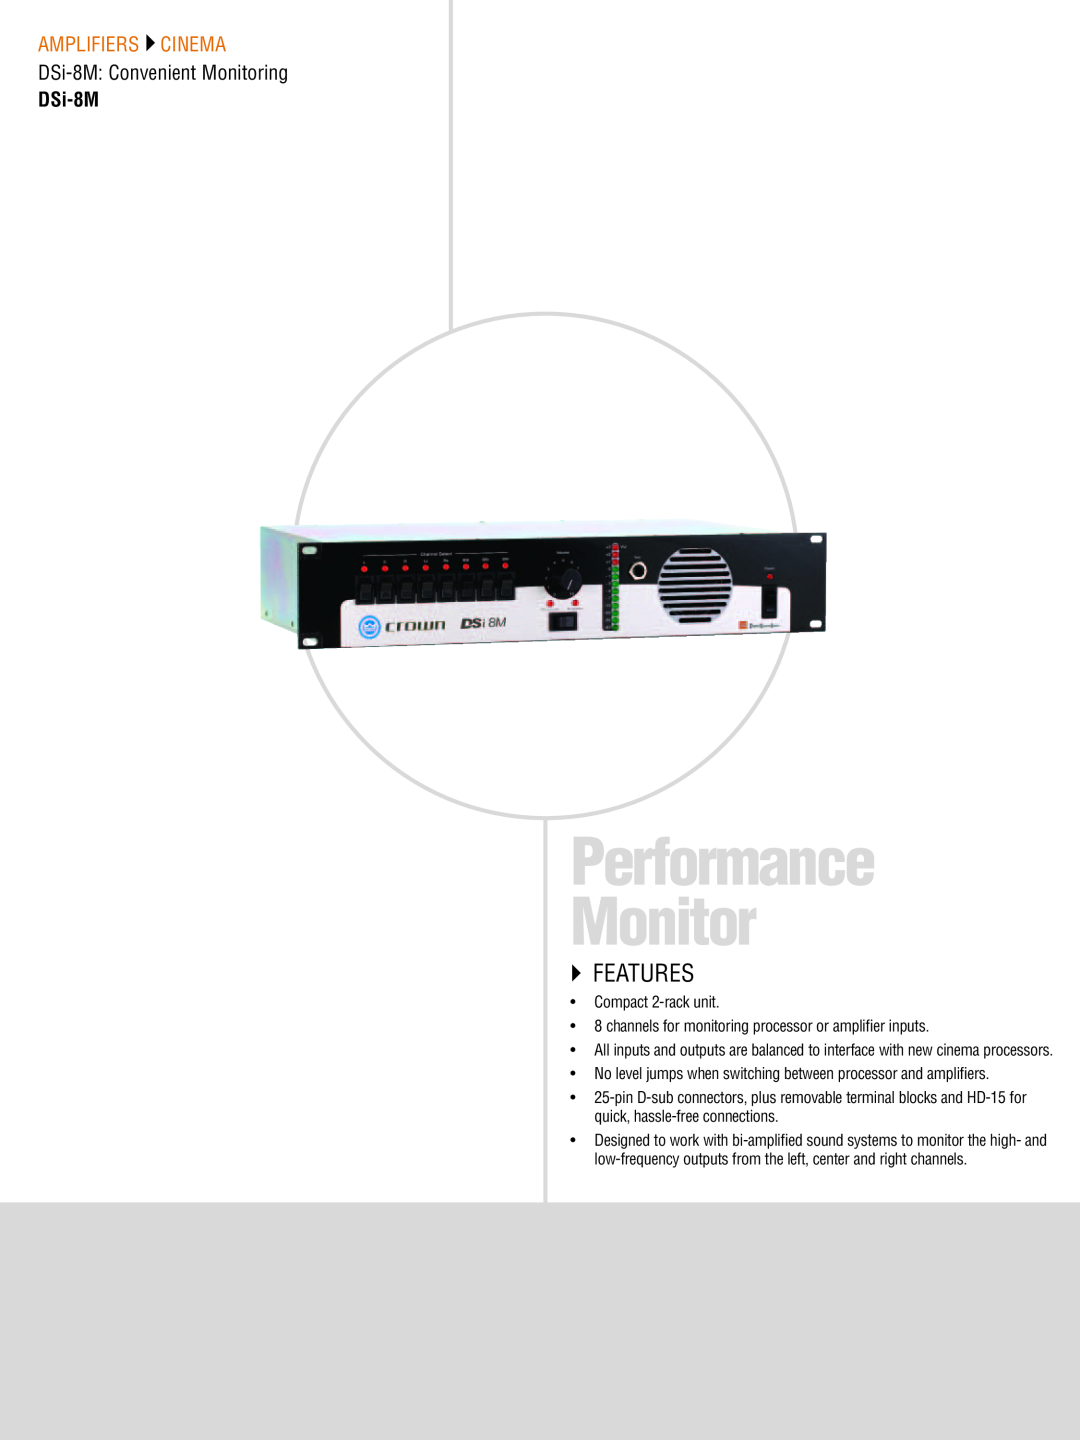 Crown CTS 3000, CTS 2000, CTS 1200 manual Performance Monitor, DSi-8M:Convenient Monitoring, `` Features, Amplifiers  Cinema 